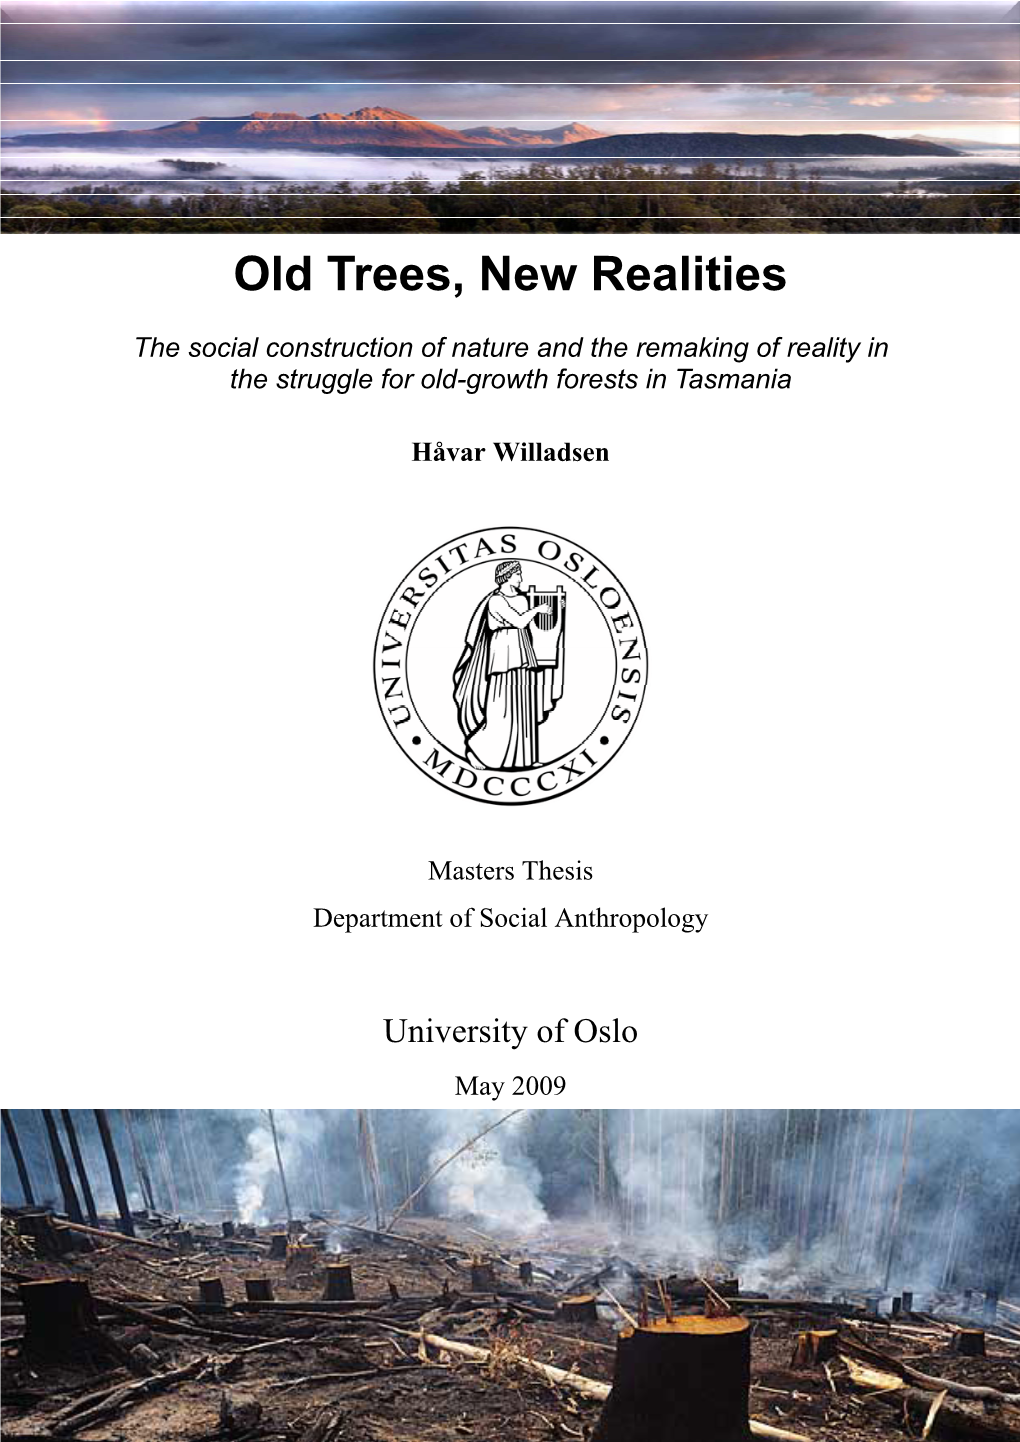 Old Trees, New Realities